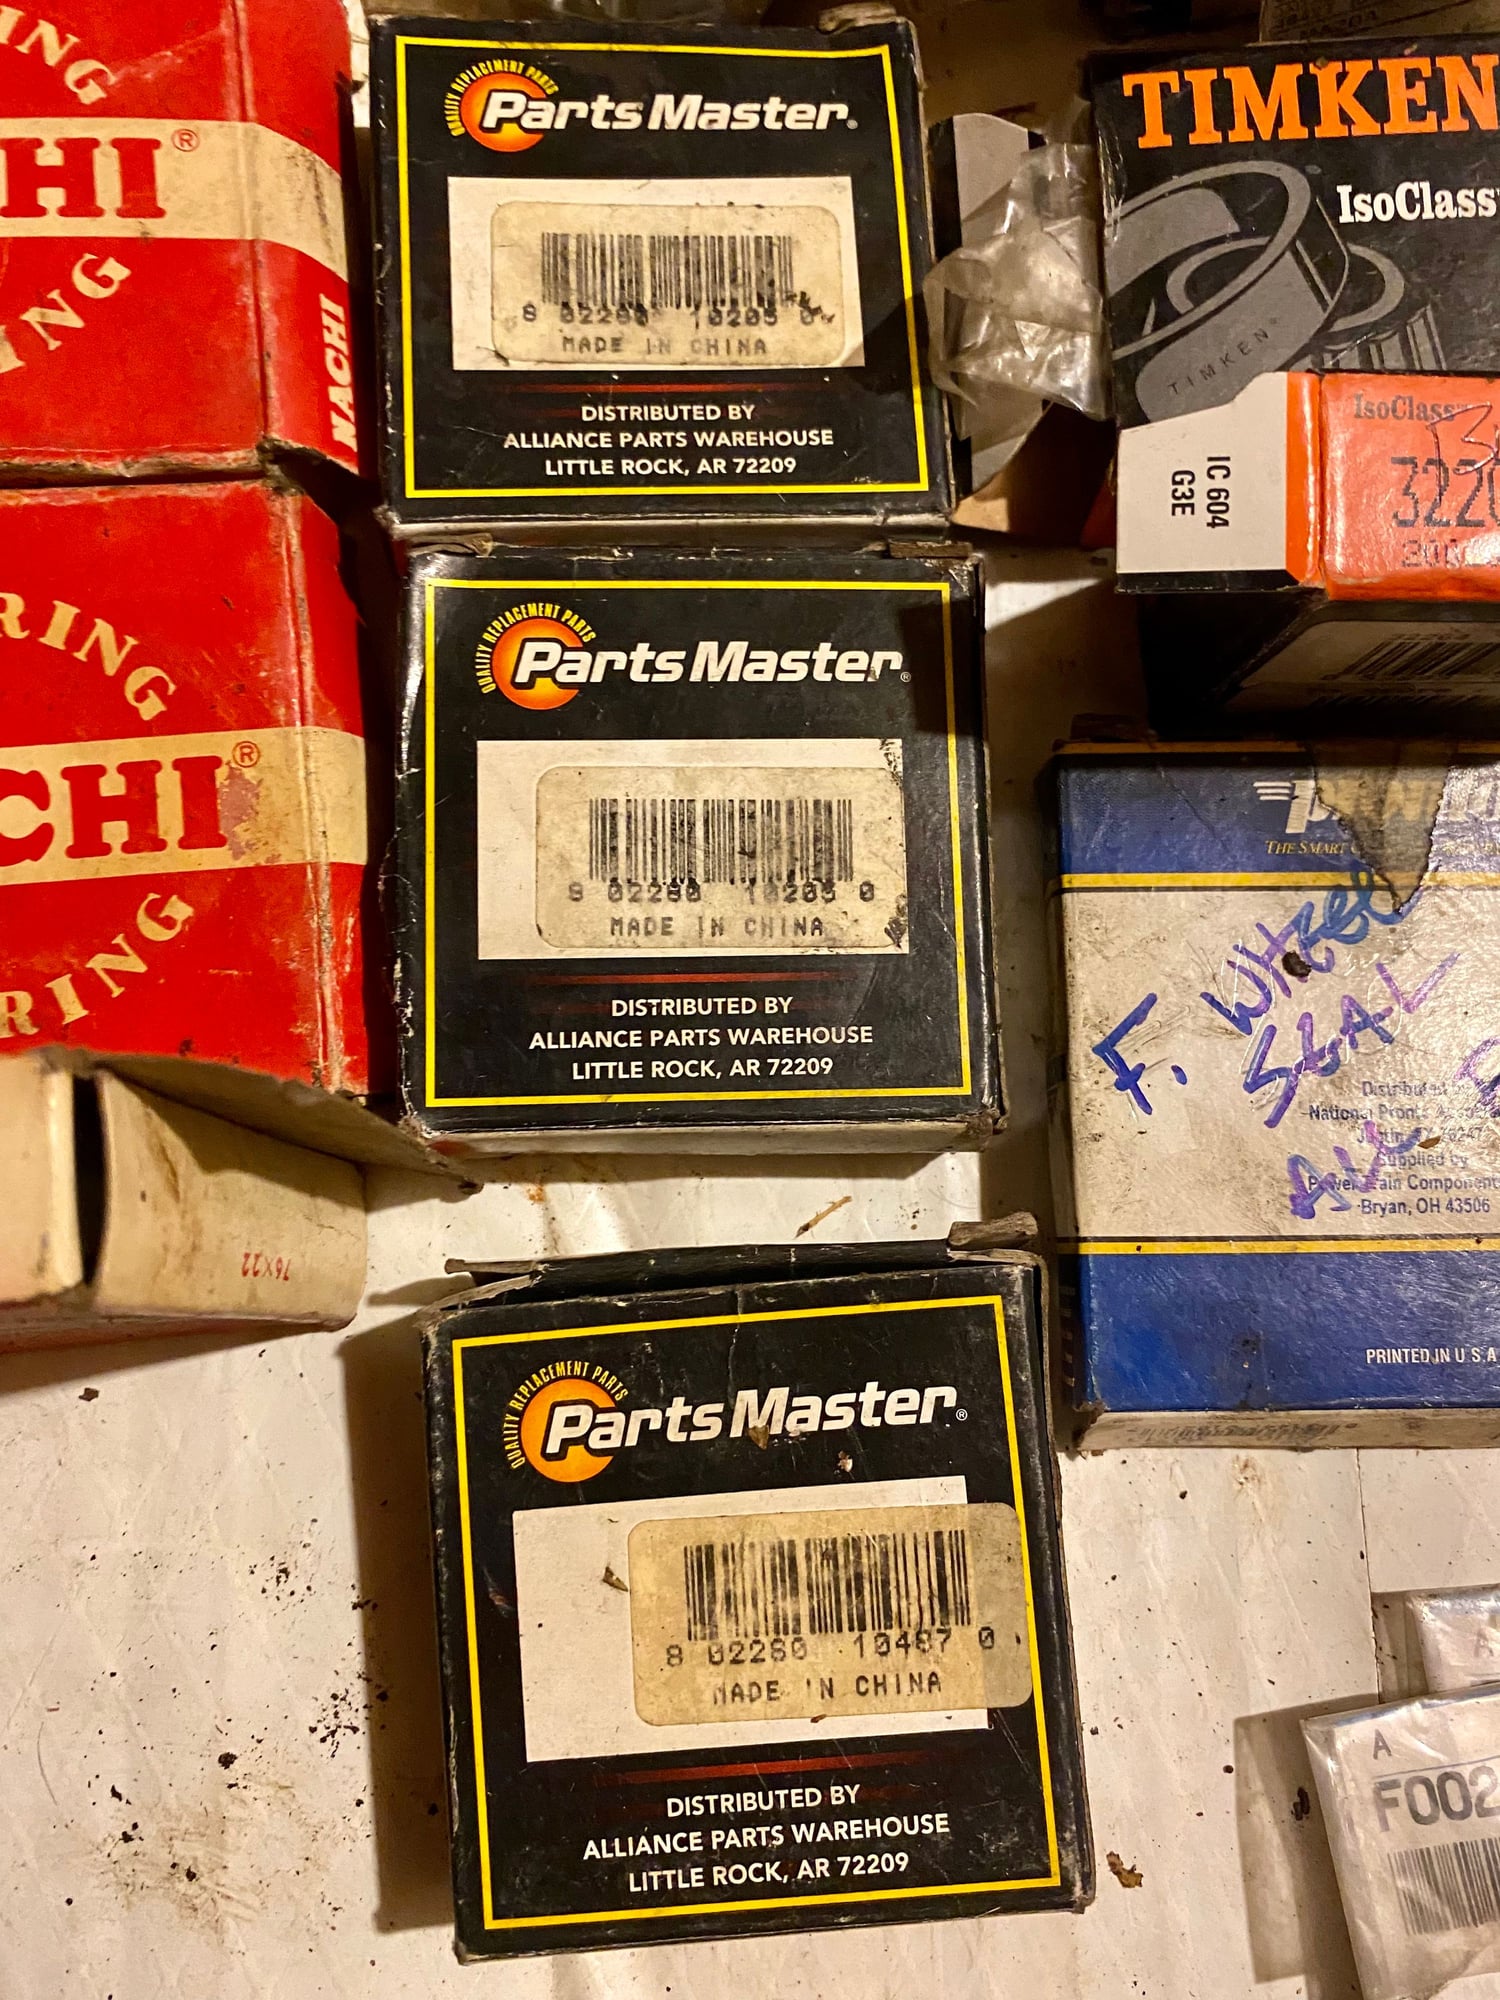 Drivetrain - Used FB, FC, and RX-8 Parts For Sale - Used - 1982 to 1985 Mazda RX-7 - Athens, AL 35620, United States